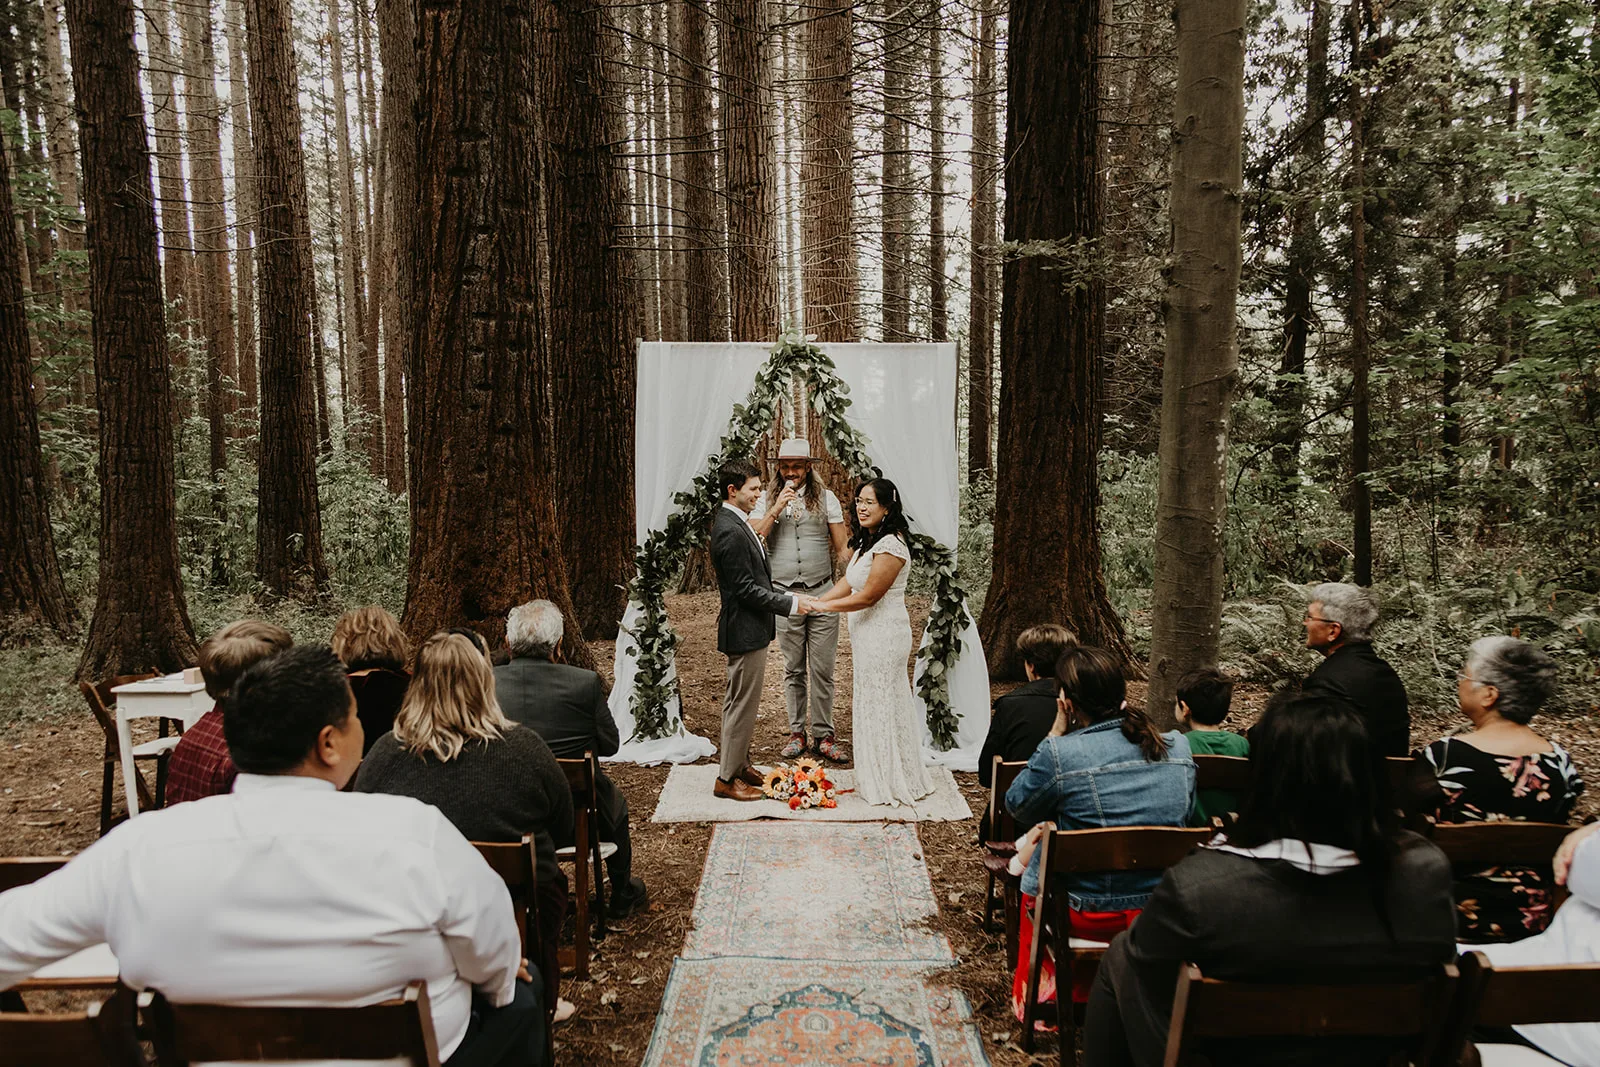 Millicent and Darius outdoor Vancouver micro wedding with Officiant Shawn, Erica Miller Photography